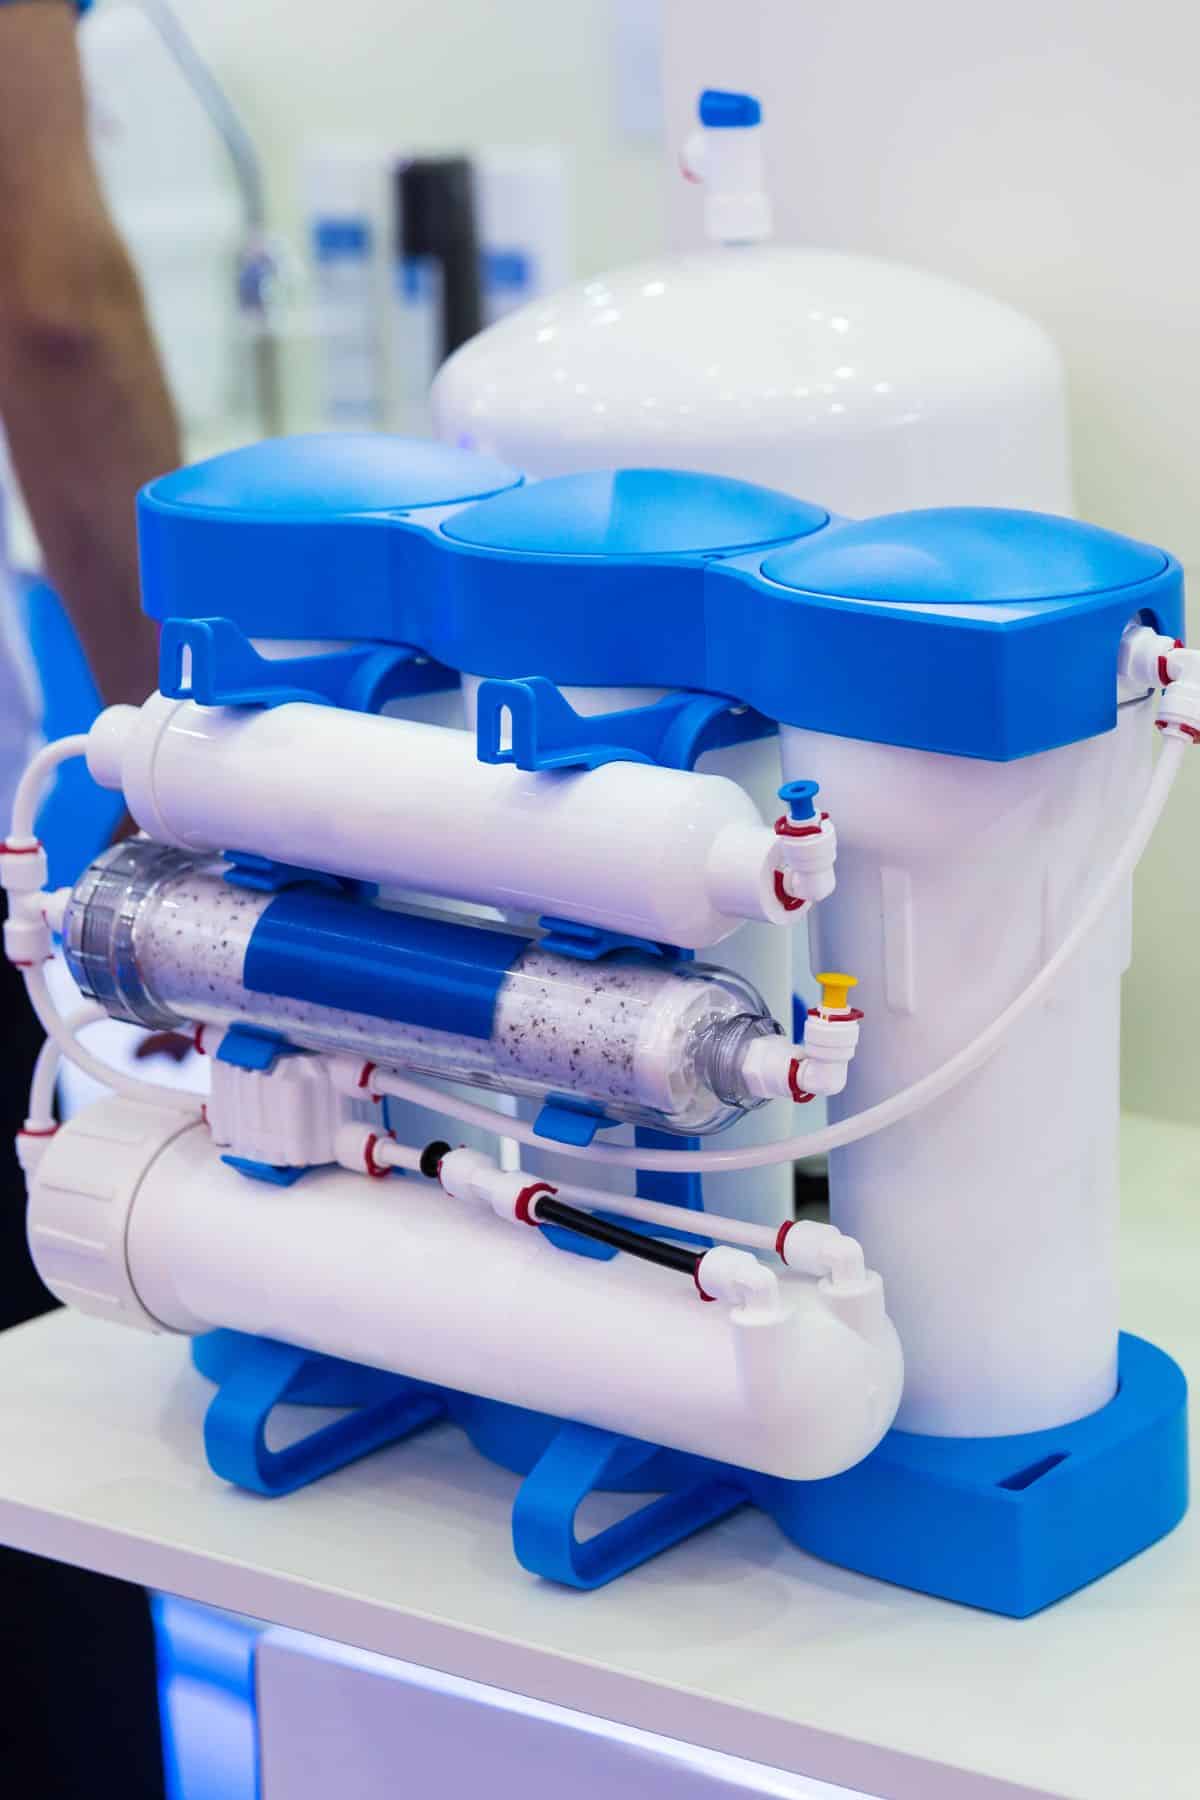 a reverse osmosis water filtration system on a counter.